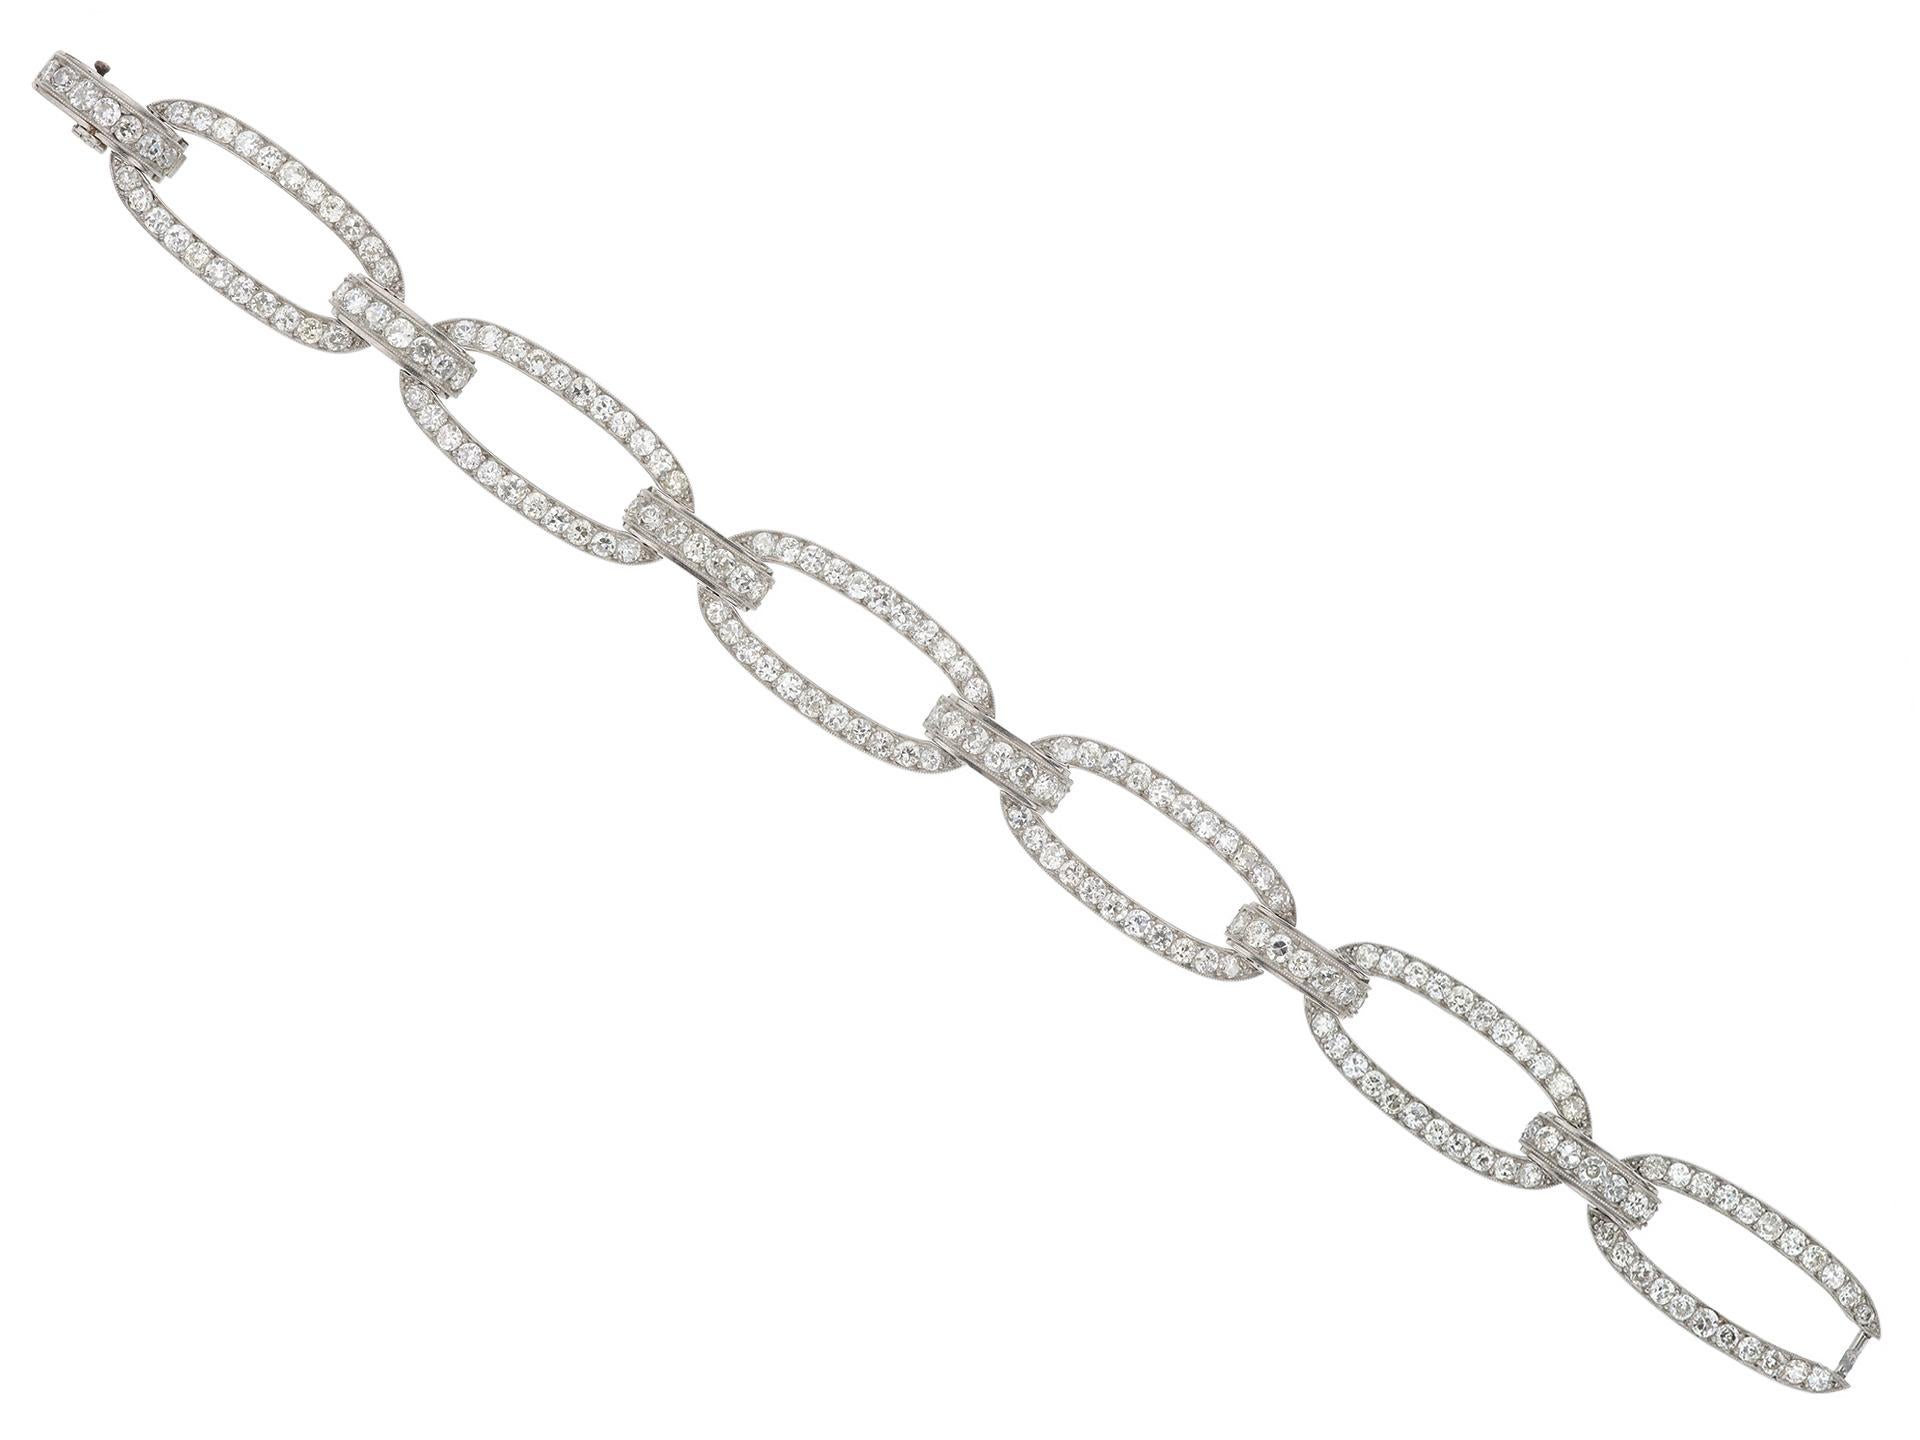 Diamond bracelet by Georges Fouquet, French, circa 1920. A platinum bracelet composed of six oval links joined by six curved bar shaped links including an integrated clasp, set with one hundred seventy four round old cut diamonds in millegrain bead